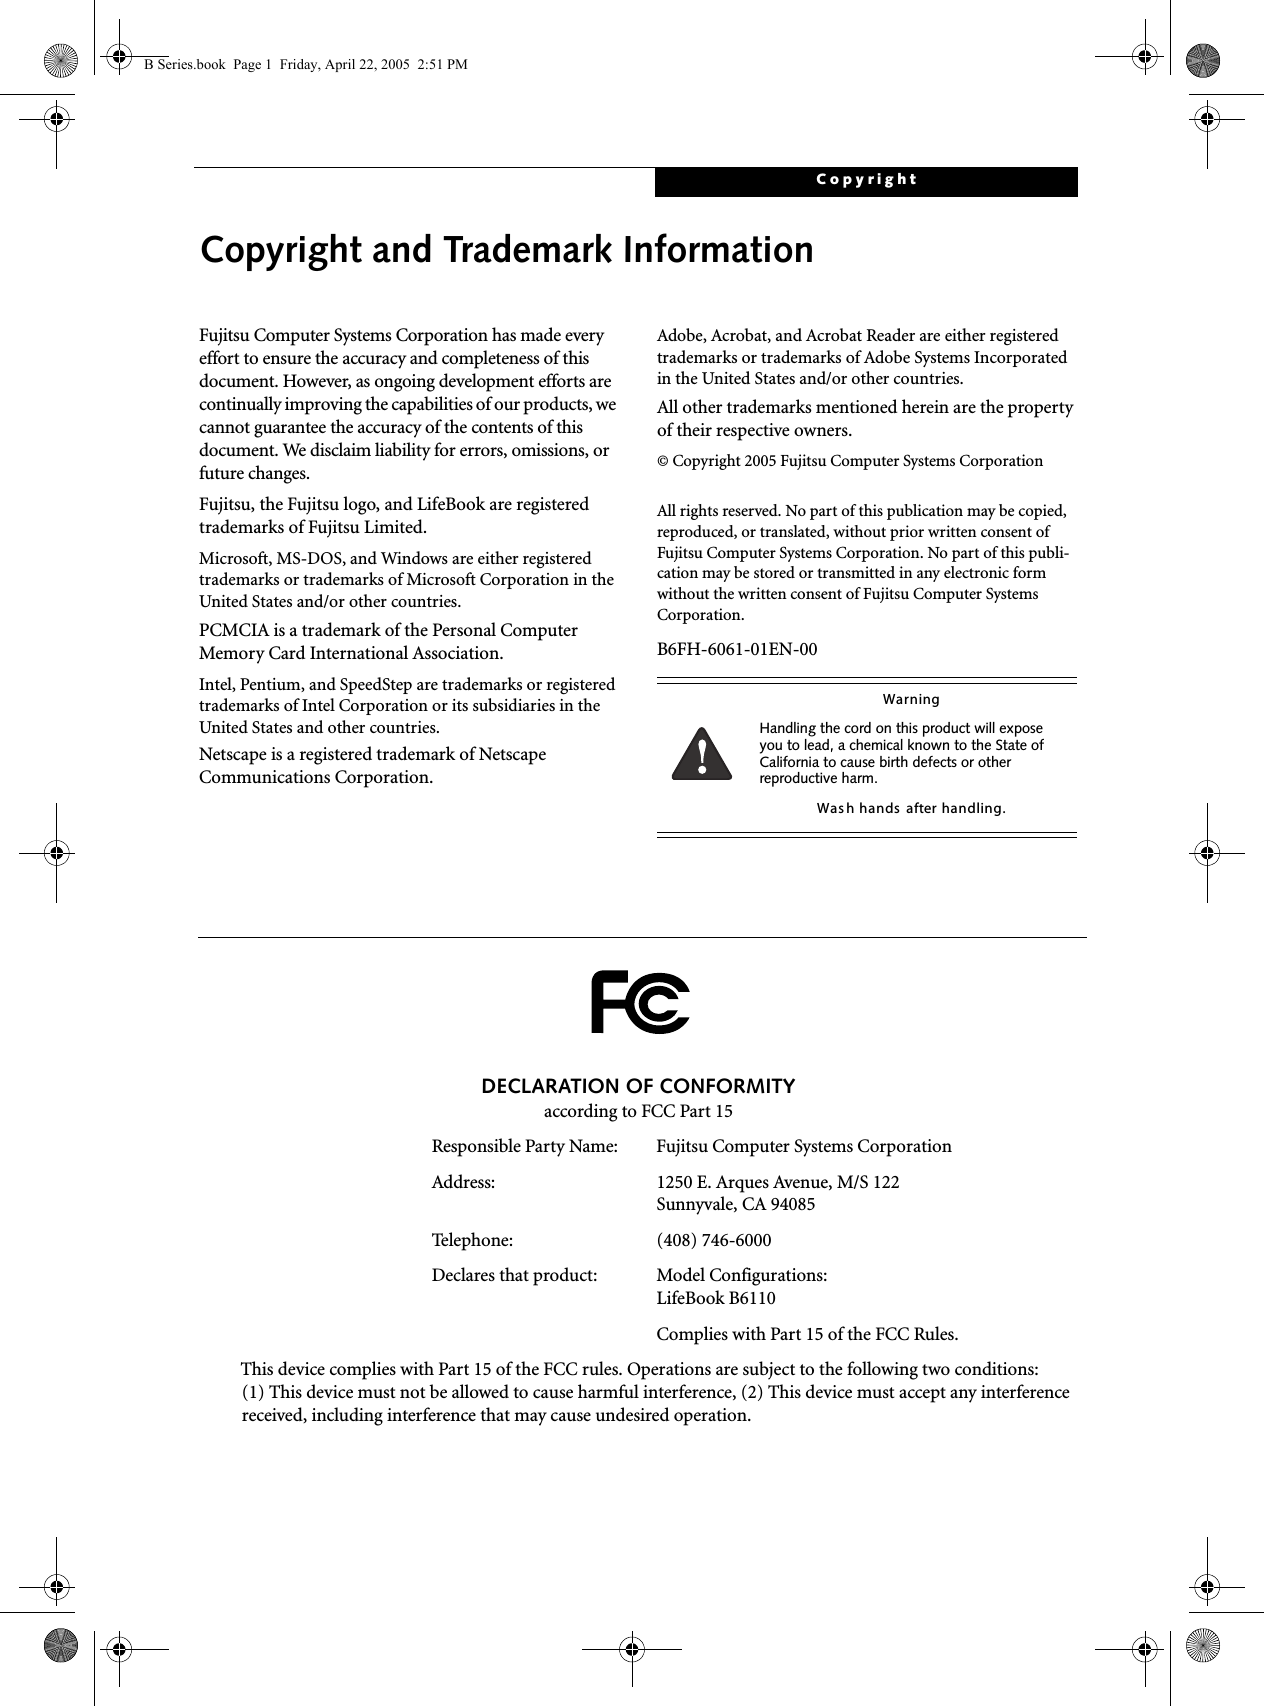 CopyrightCopyright and Trademark InformationFujitsu Computer Systems Corporation has made every effort to ensure the accuracy and completeness of this document. However, as ongoing development efforts are continually improving the capabilities of our products, we cannot guarantee the accuracy of the contents of this document. We disclaim liability for errors, omissions, or future changes.Fujitsu, the Fujitsu logo, and LifeBook are registered trademarks of Fujitsu Limited.Microsoft, MS-DOS, and Windows are either registered trademarks or trademarks of Microsoft Corporation in the United States and/or other countries.PCMCIA is a trademark of the Personal Computer Memory Card International Association.Intel, Pentium, and SpeedStep are trademarks or registered trademarks of Intel Corporation or its subsidiaries in the United States and other countries.Netscape is a registered trademark of Netscape Communications Corporation.Adobe, Acrobat, and Acrobat Reader are either registered trademarks or trademarks of Adobe Systems Incorporated in the United States and/or other countries.All other trademarks mentioned herein are the property of their respective owners.© Copyright 2005 Fujitsu Computer Systems CorporationAll rights reserved. No part of this publication may be copied, reproduced, or translated, without prior written consent of Fujitsu Computer Systems Corporation. No part of this publi-cation may be stored or transmitted in any electronic form without the written consent of Fujitsu Computer Systems Corporation.B6FH-6061-01EN-00W a rn i n gHandling the cord on this product will expose you to lead, a chemical known to the State of California to cause birth defects or other reproductive harm. Was h hands  after handling.DECLARATION OF CONFORMITYaccording to FCC Part 15Responsible Party Name: Fujitsu Computer Systems CorporationAddress:  1250 E. Arques Avenue, M/S 122Sunnyvale, CA 94085Telephone: (408) 746-6000Declares that product: Model Configurations:LifeBook B6110  Complies with Part 15 of the FCC Rules.This device complies with Part 15 of the FCC rules. Operations are subject to the following two conditions:(1) This device must not be allowed to cause harmful interference, (2) This device must accept any interference received, including interference that may cause undesired operation.B Series.book  Page 1  Friday, April 22, 2005  2:51 PM